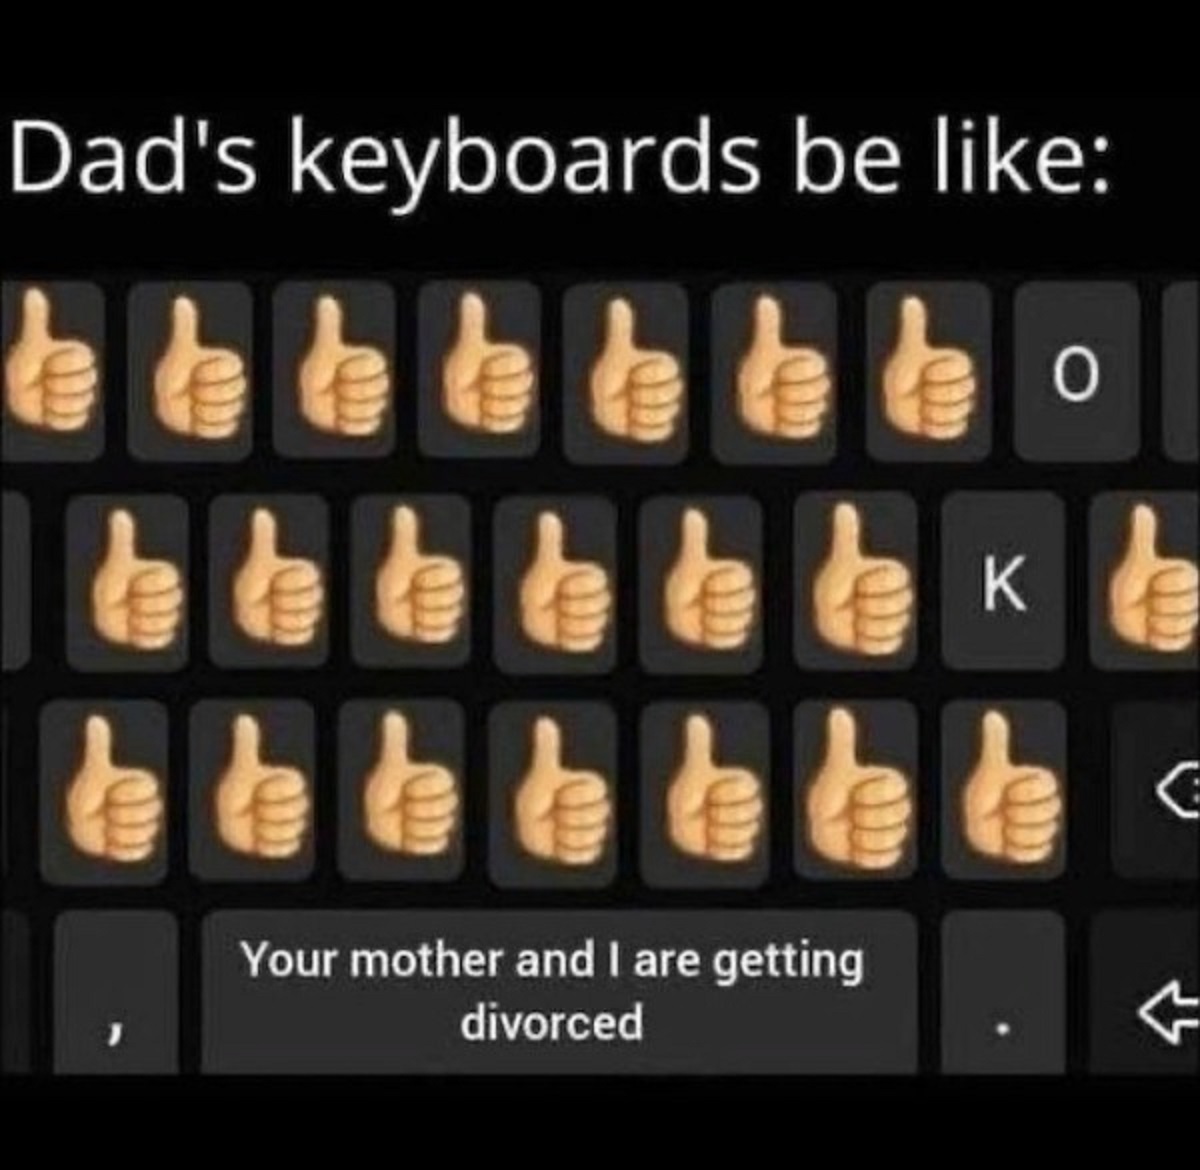 dads keyboard meme divorce - Dad's keyboards be 999999 K 999 999 999 Your mother and I are getting divorced